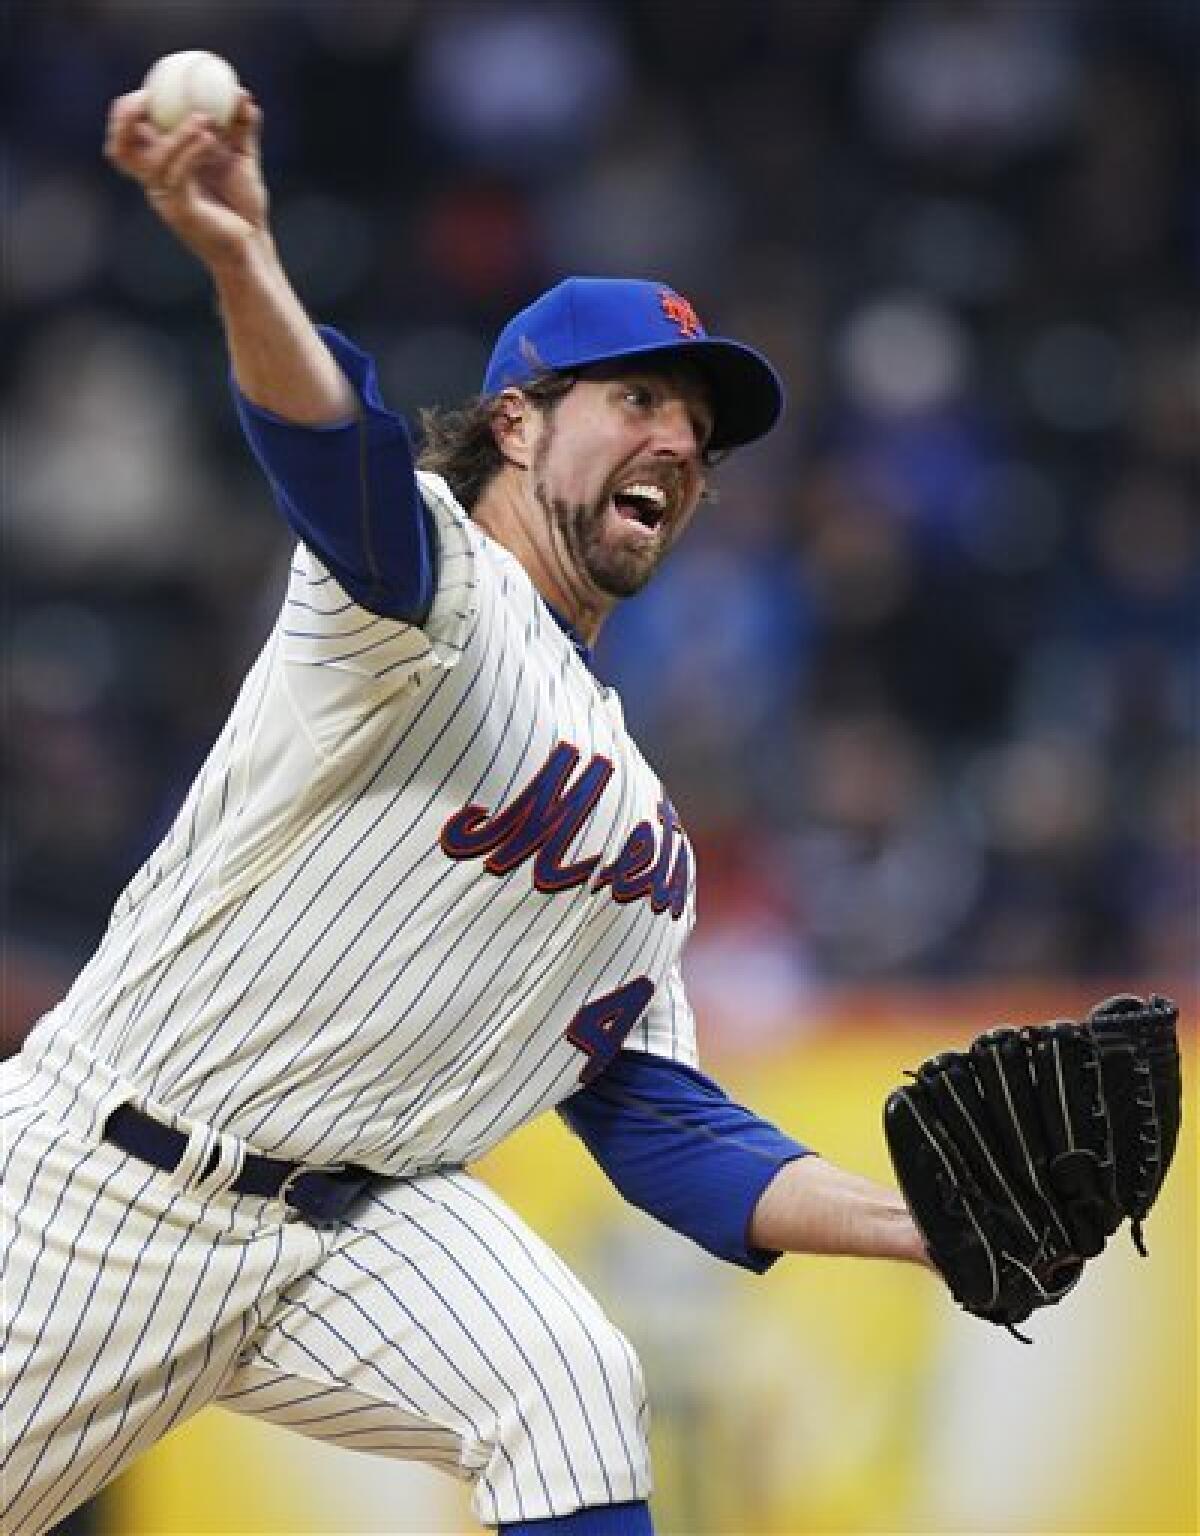 R.A. Dickey: On 'Winding Up' As The Lone Knuckleballer In The